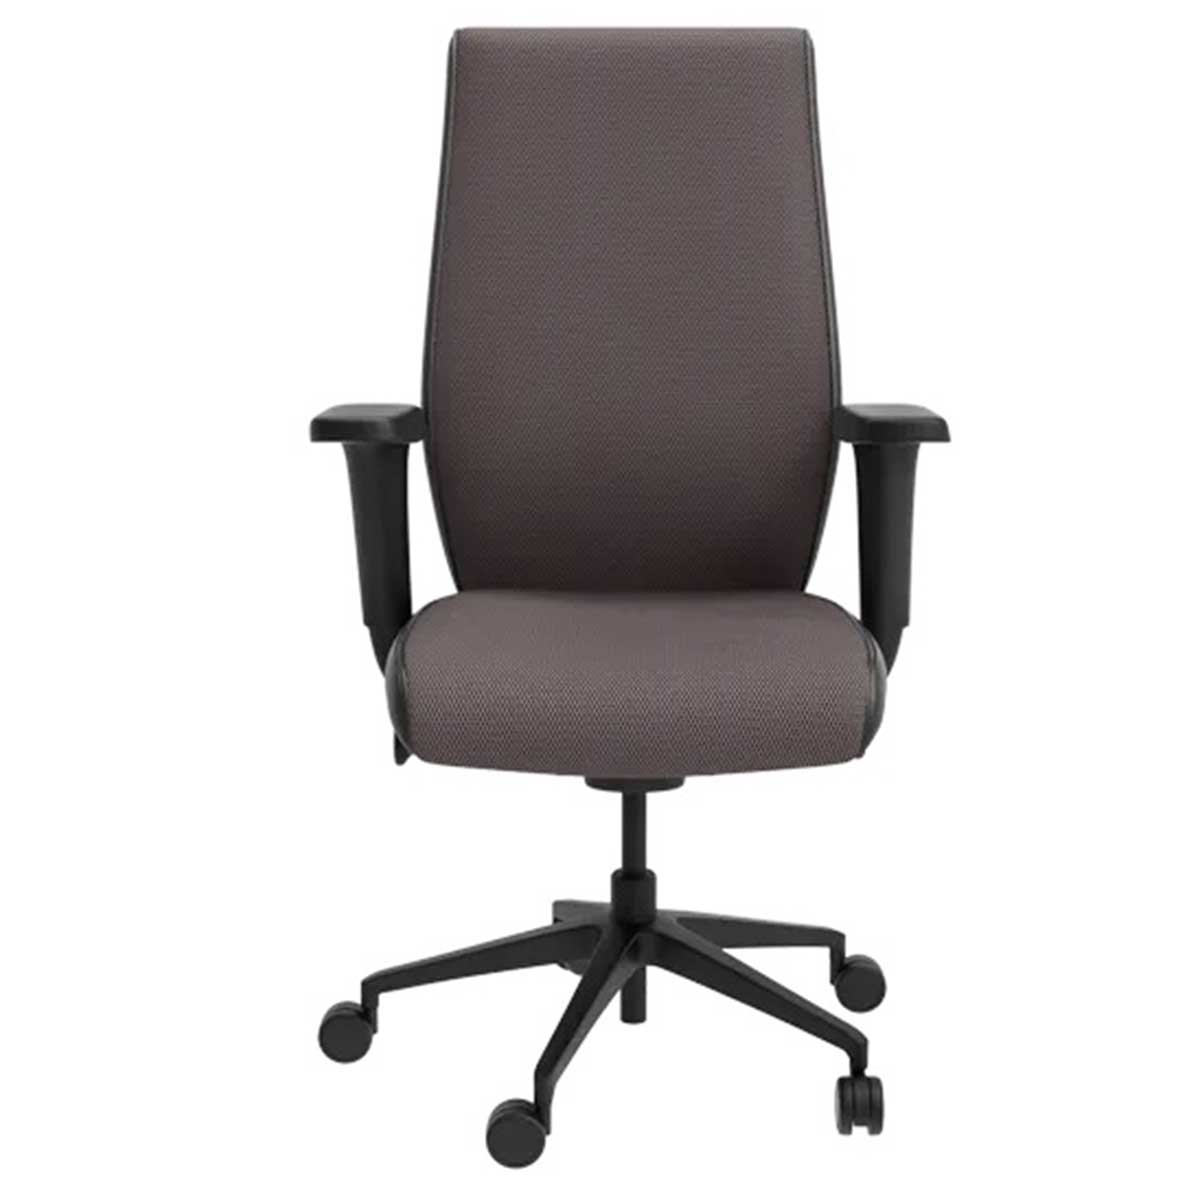 Workstation Chair Manufacturers, Suppliers in Golf Course